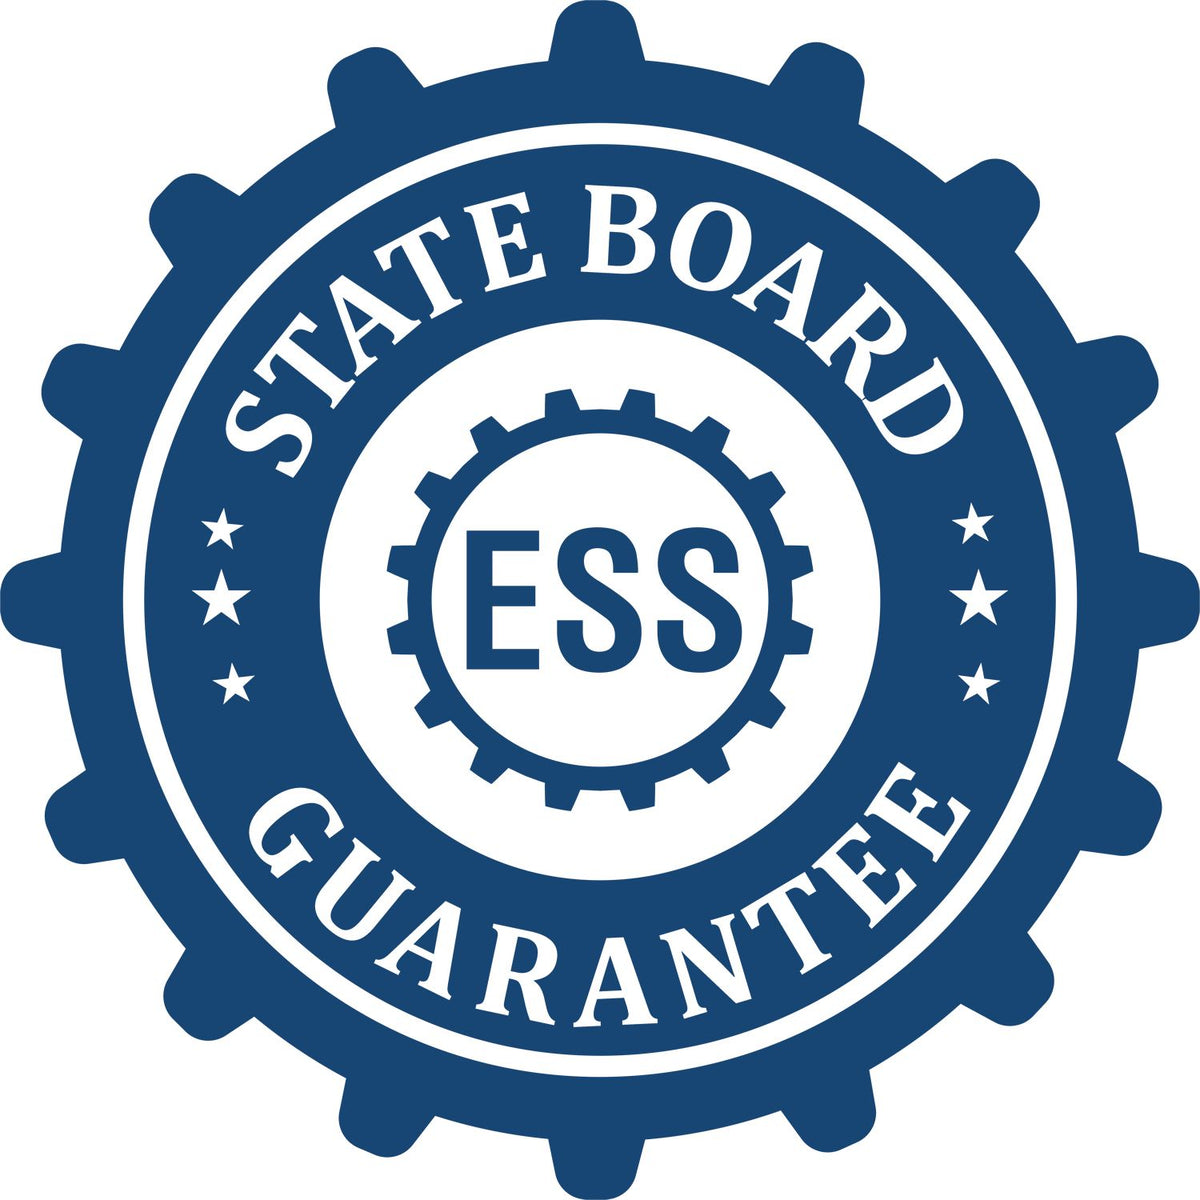 An emblem in a gear shape illustrating a state board guarantee for the Heavy-Duty Nebraska Rectangular Notary Stamp product.